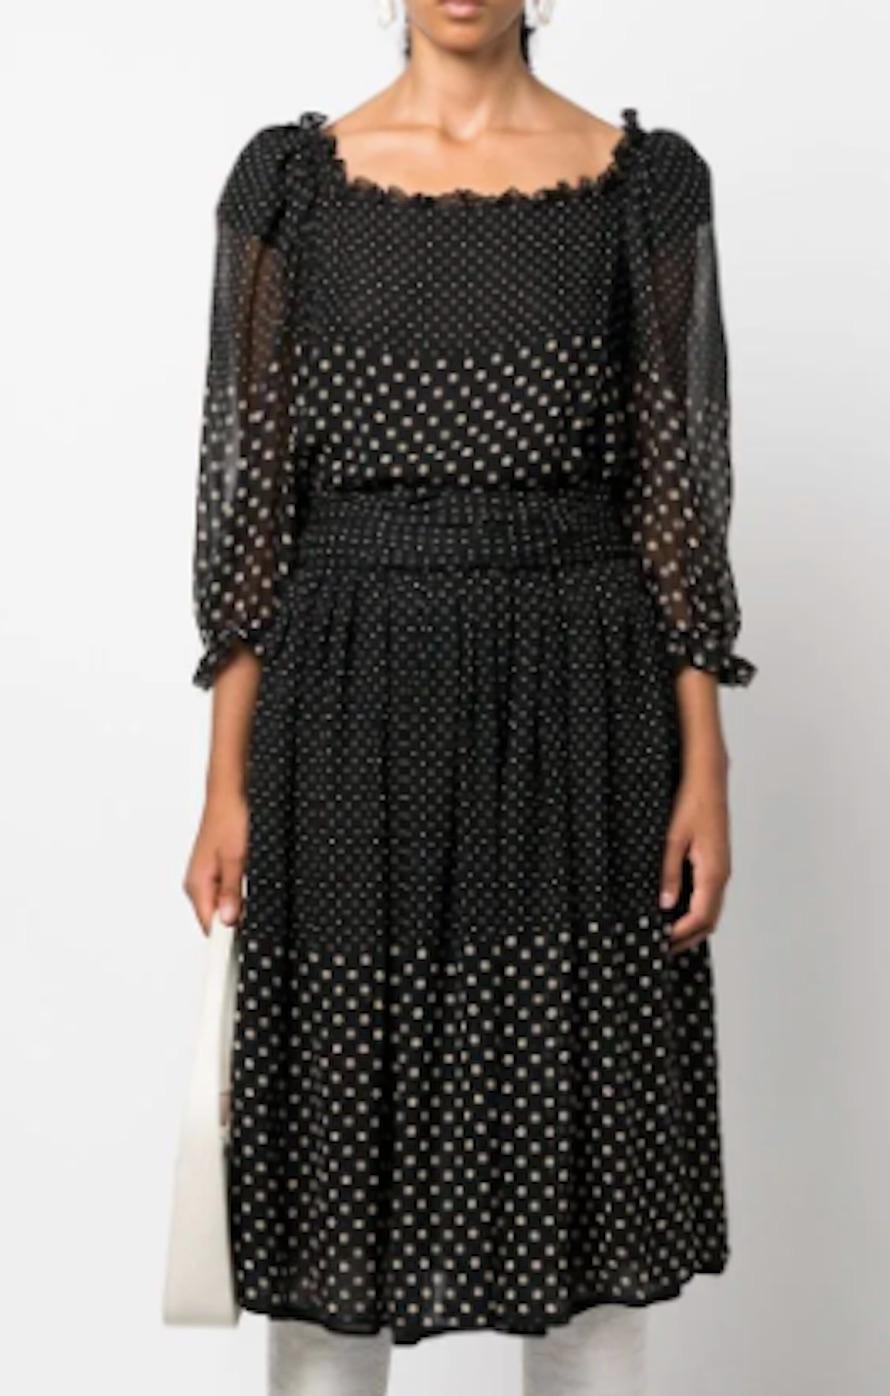 Valentino silk dots dress featuring mousseline silk with 2 dots print sizes, a full silk lining, elasticated sleeves cuffs, side zip opening with small snaps, a separated belt
Seperated belt with snaps and pleats:
(2.3in. (6cm) X 100.2in